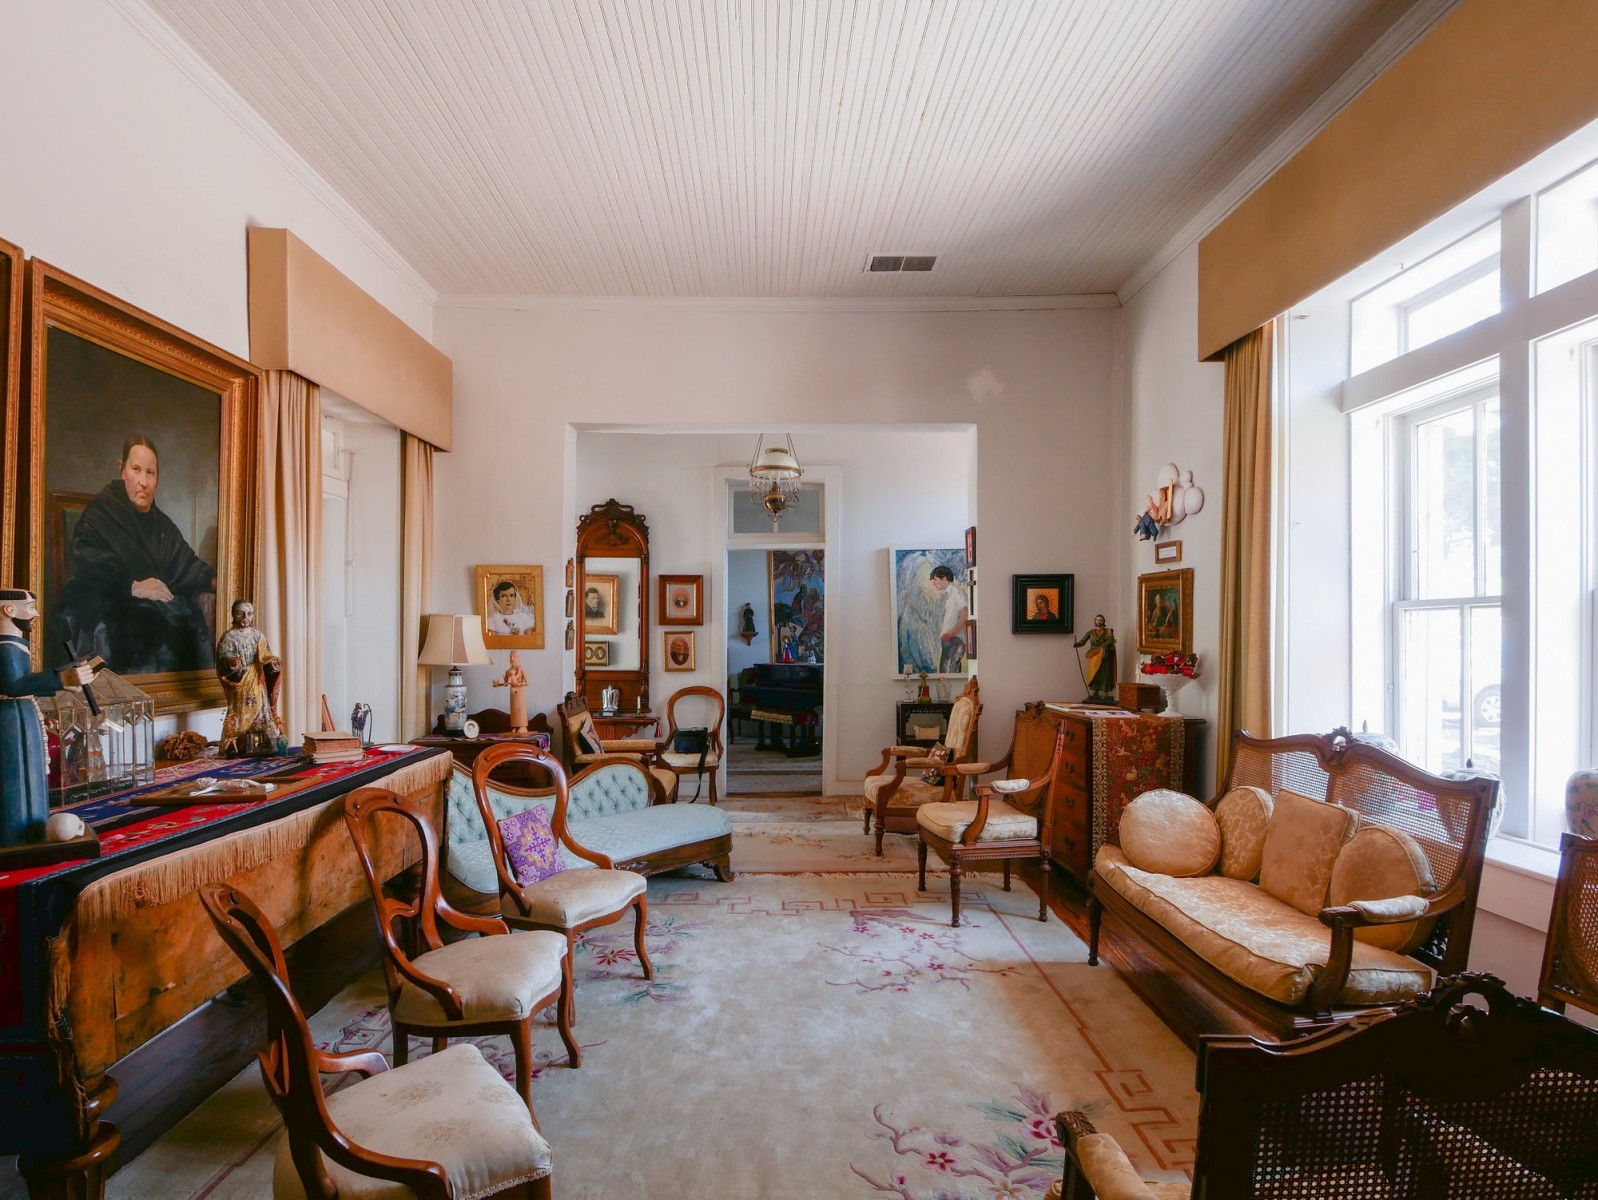 The Sala of the Taylor-Mesilla Historic Property. Photo by Tom Conelly.